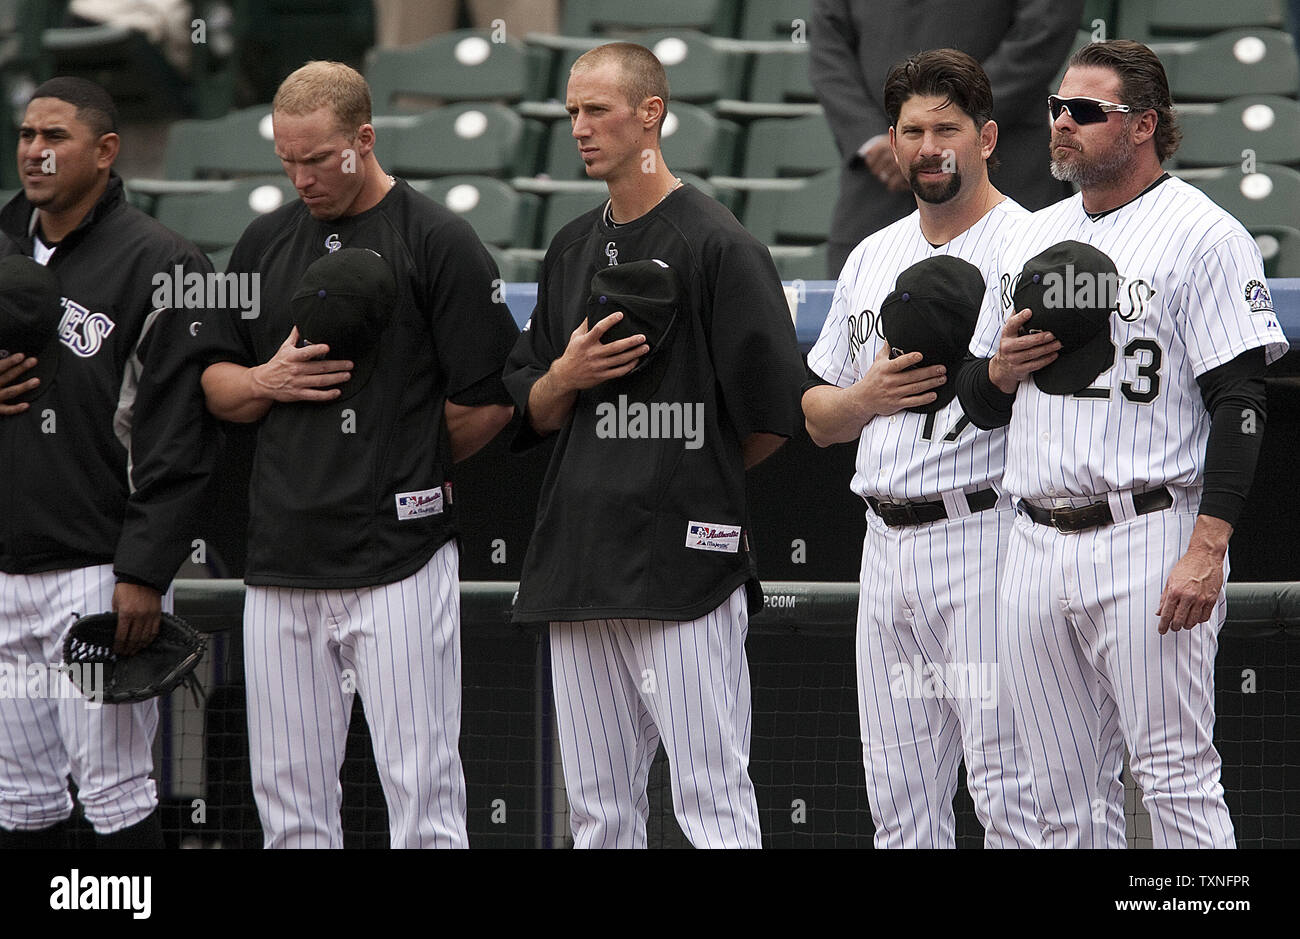 The Colorado Rockies honor baseball great Harmon Killebrew who passed away with a moment of silence at Coors Field in Denver on May 17, 2011.    UPI/Gary C. Caskey Stock Photo